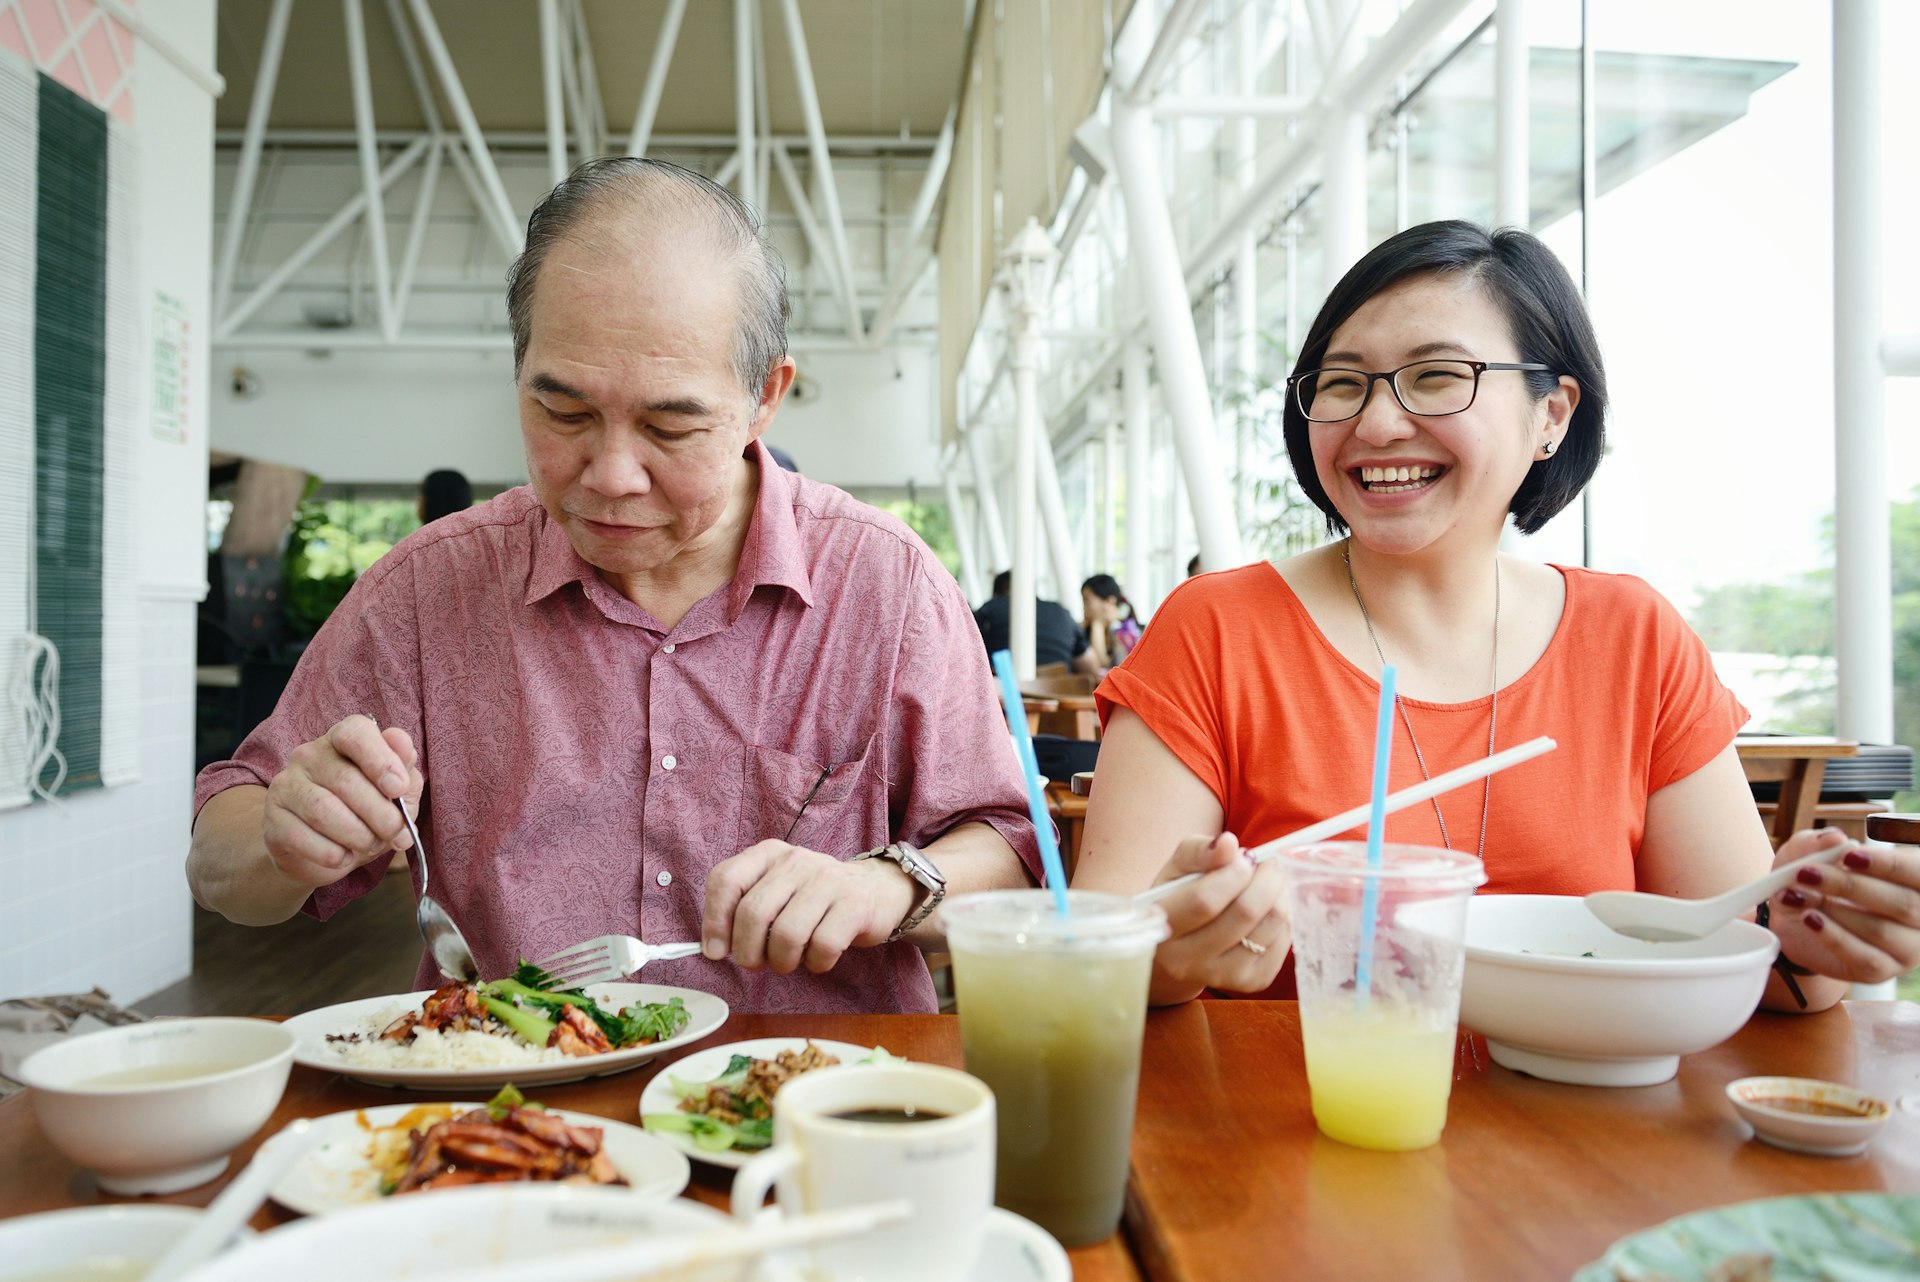 Asian lady and a mature man enjoy their meal. The lady is laughing at something, while the man is concentrating on his food.